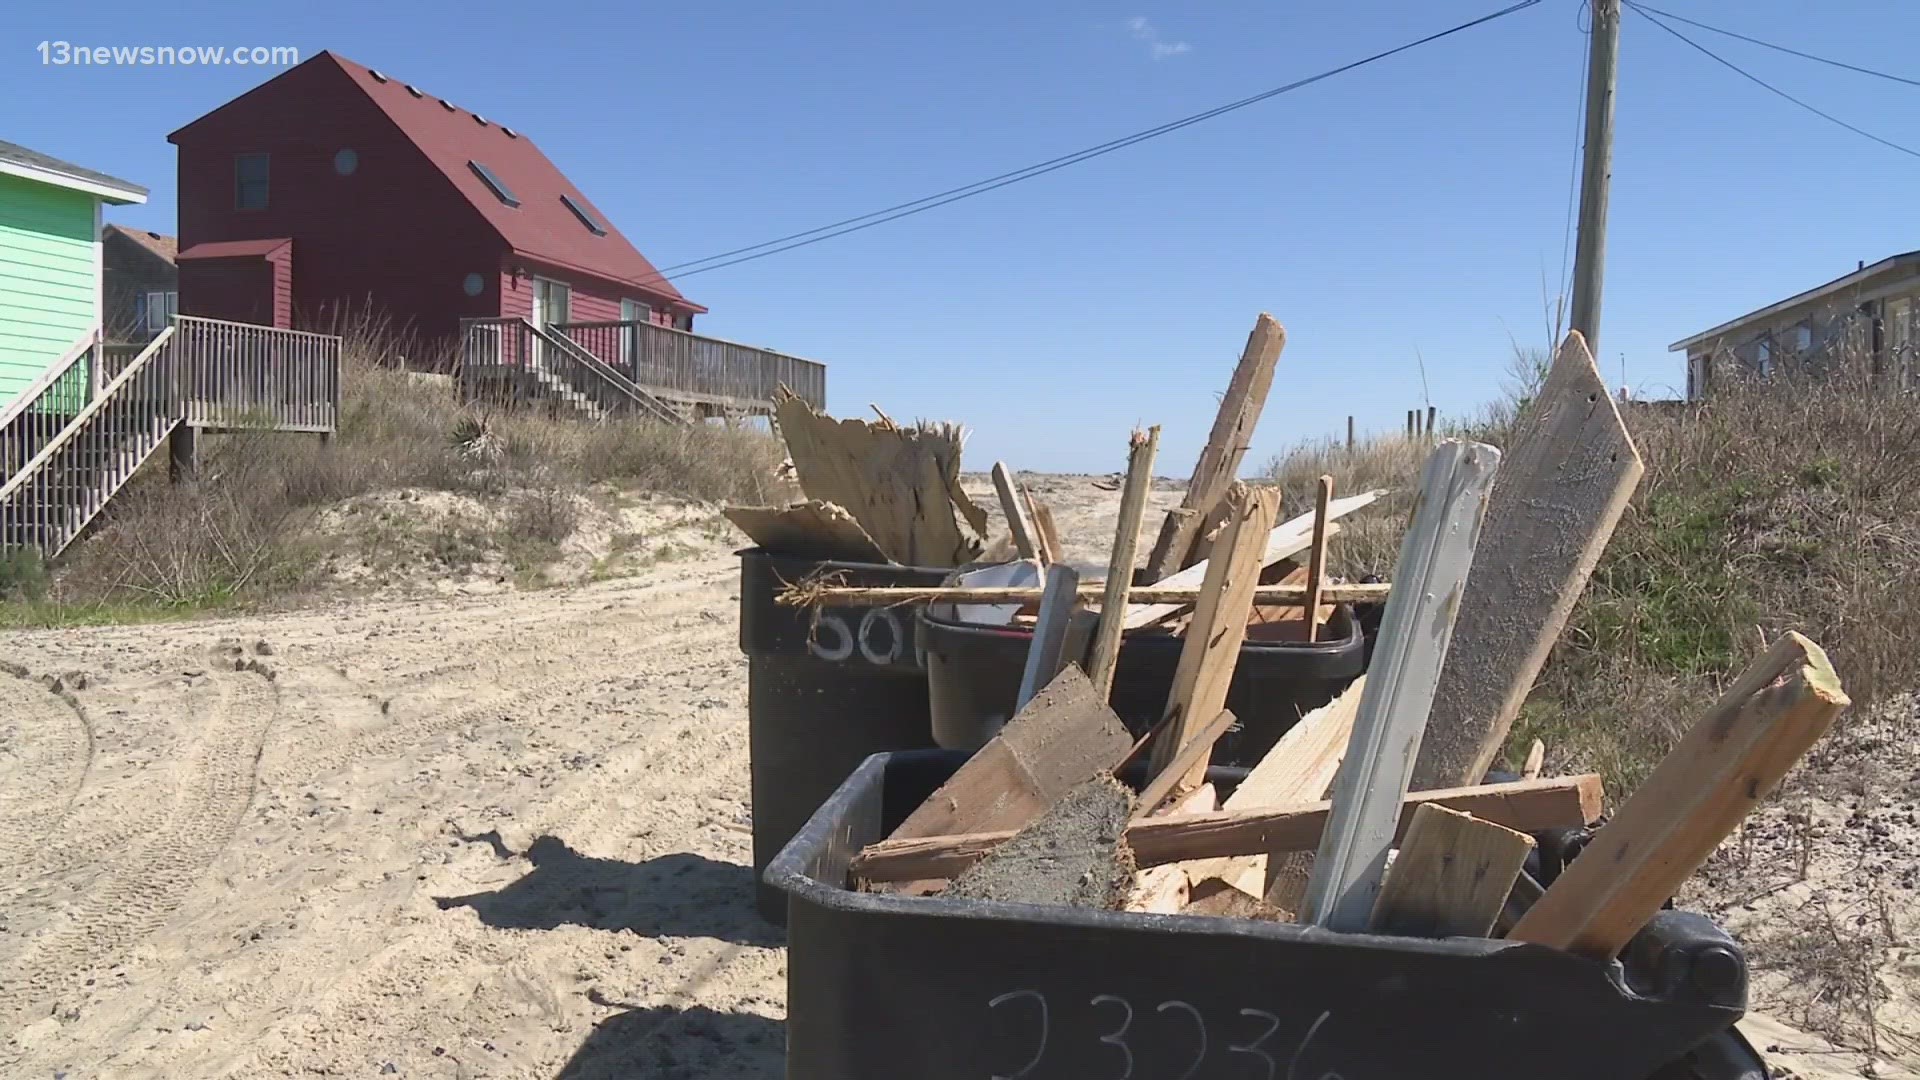 It’s taking multiple groups to clean up the mess left behind after another home fell into the ocean in Rodanthe this week.